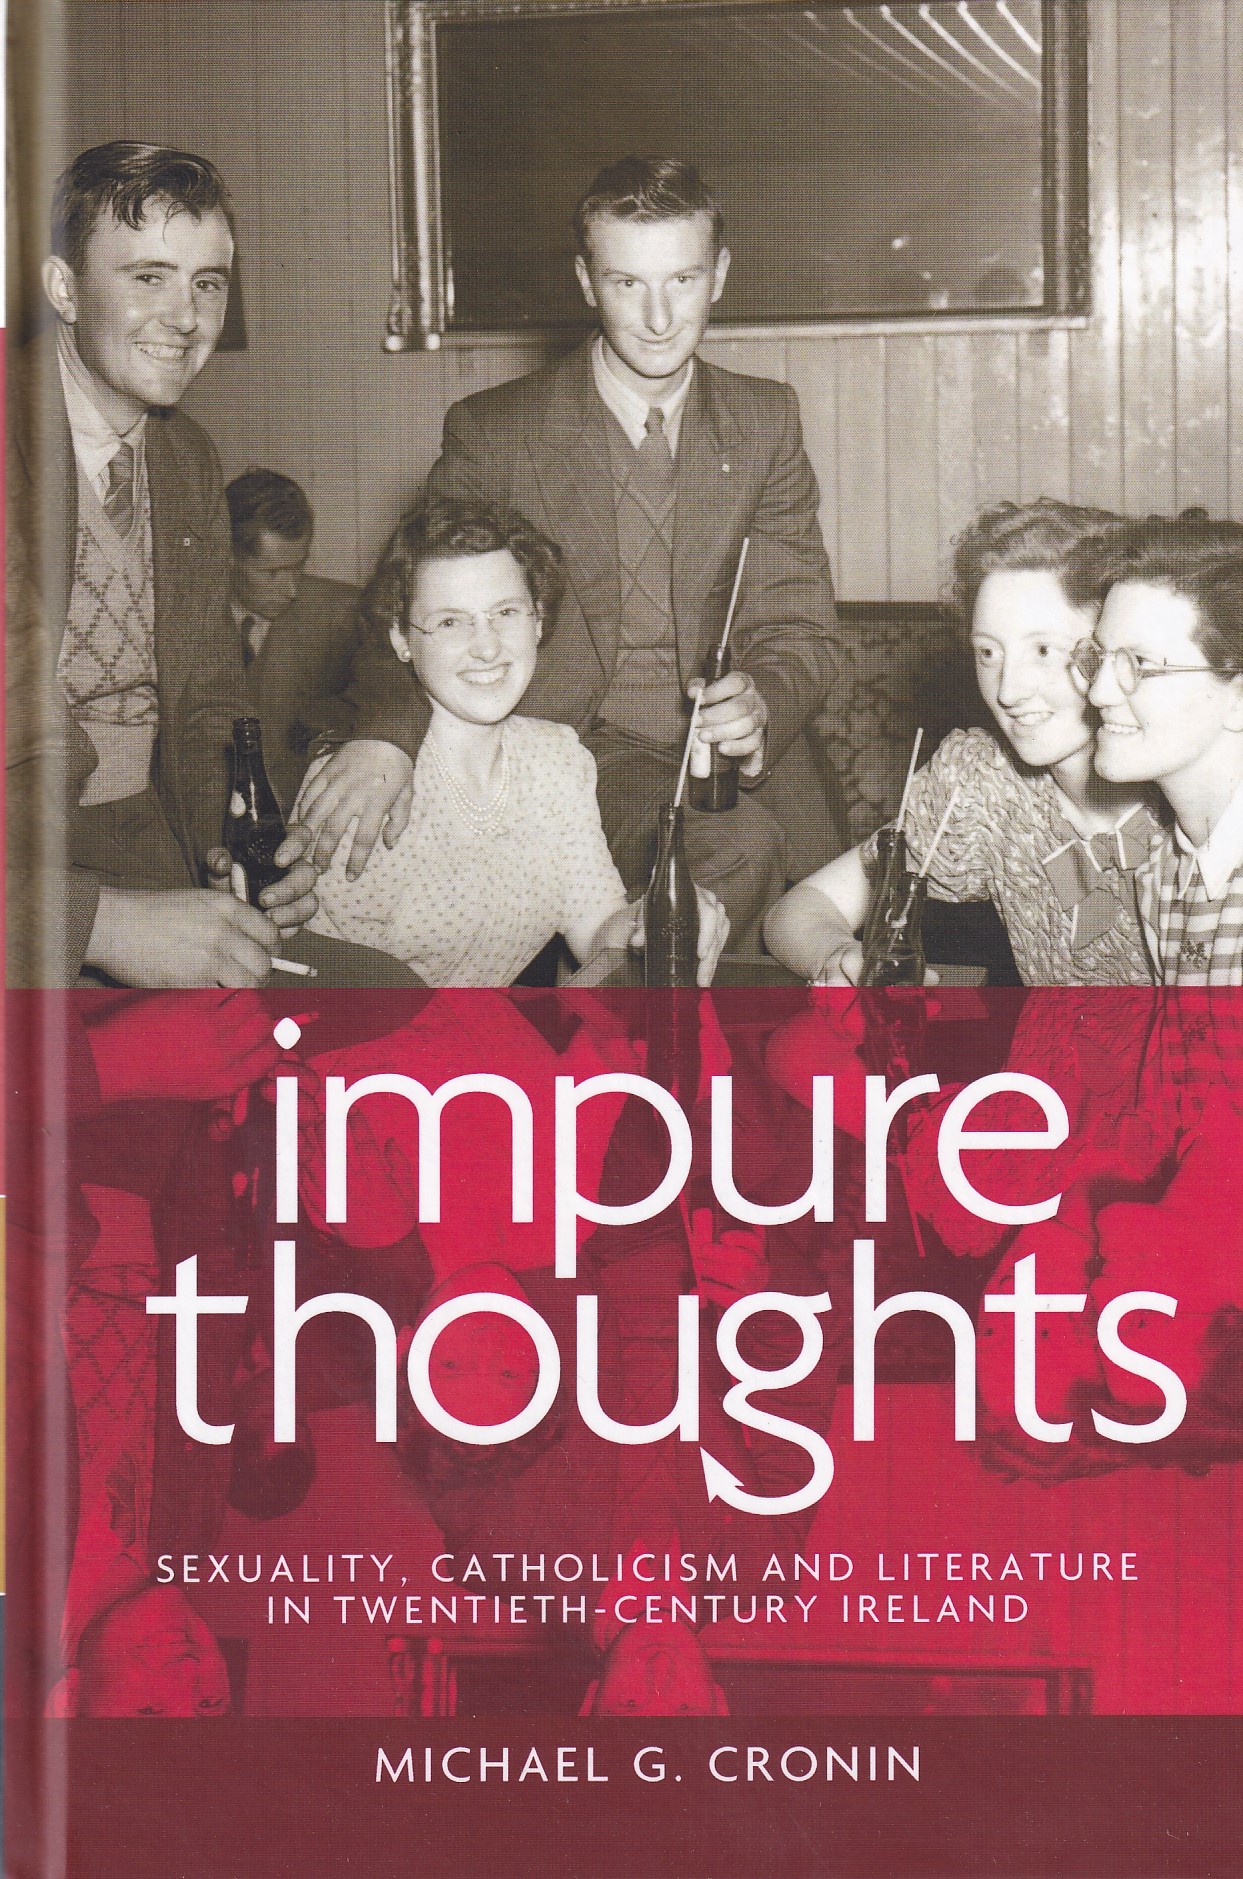 Impure thoughts Sexuality, Catholicism and literature in twentieth-century Ireland by Michael G. Cronin